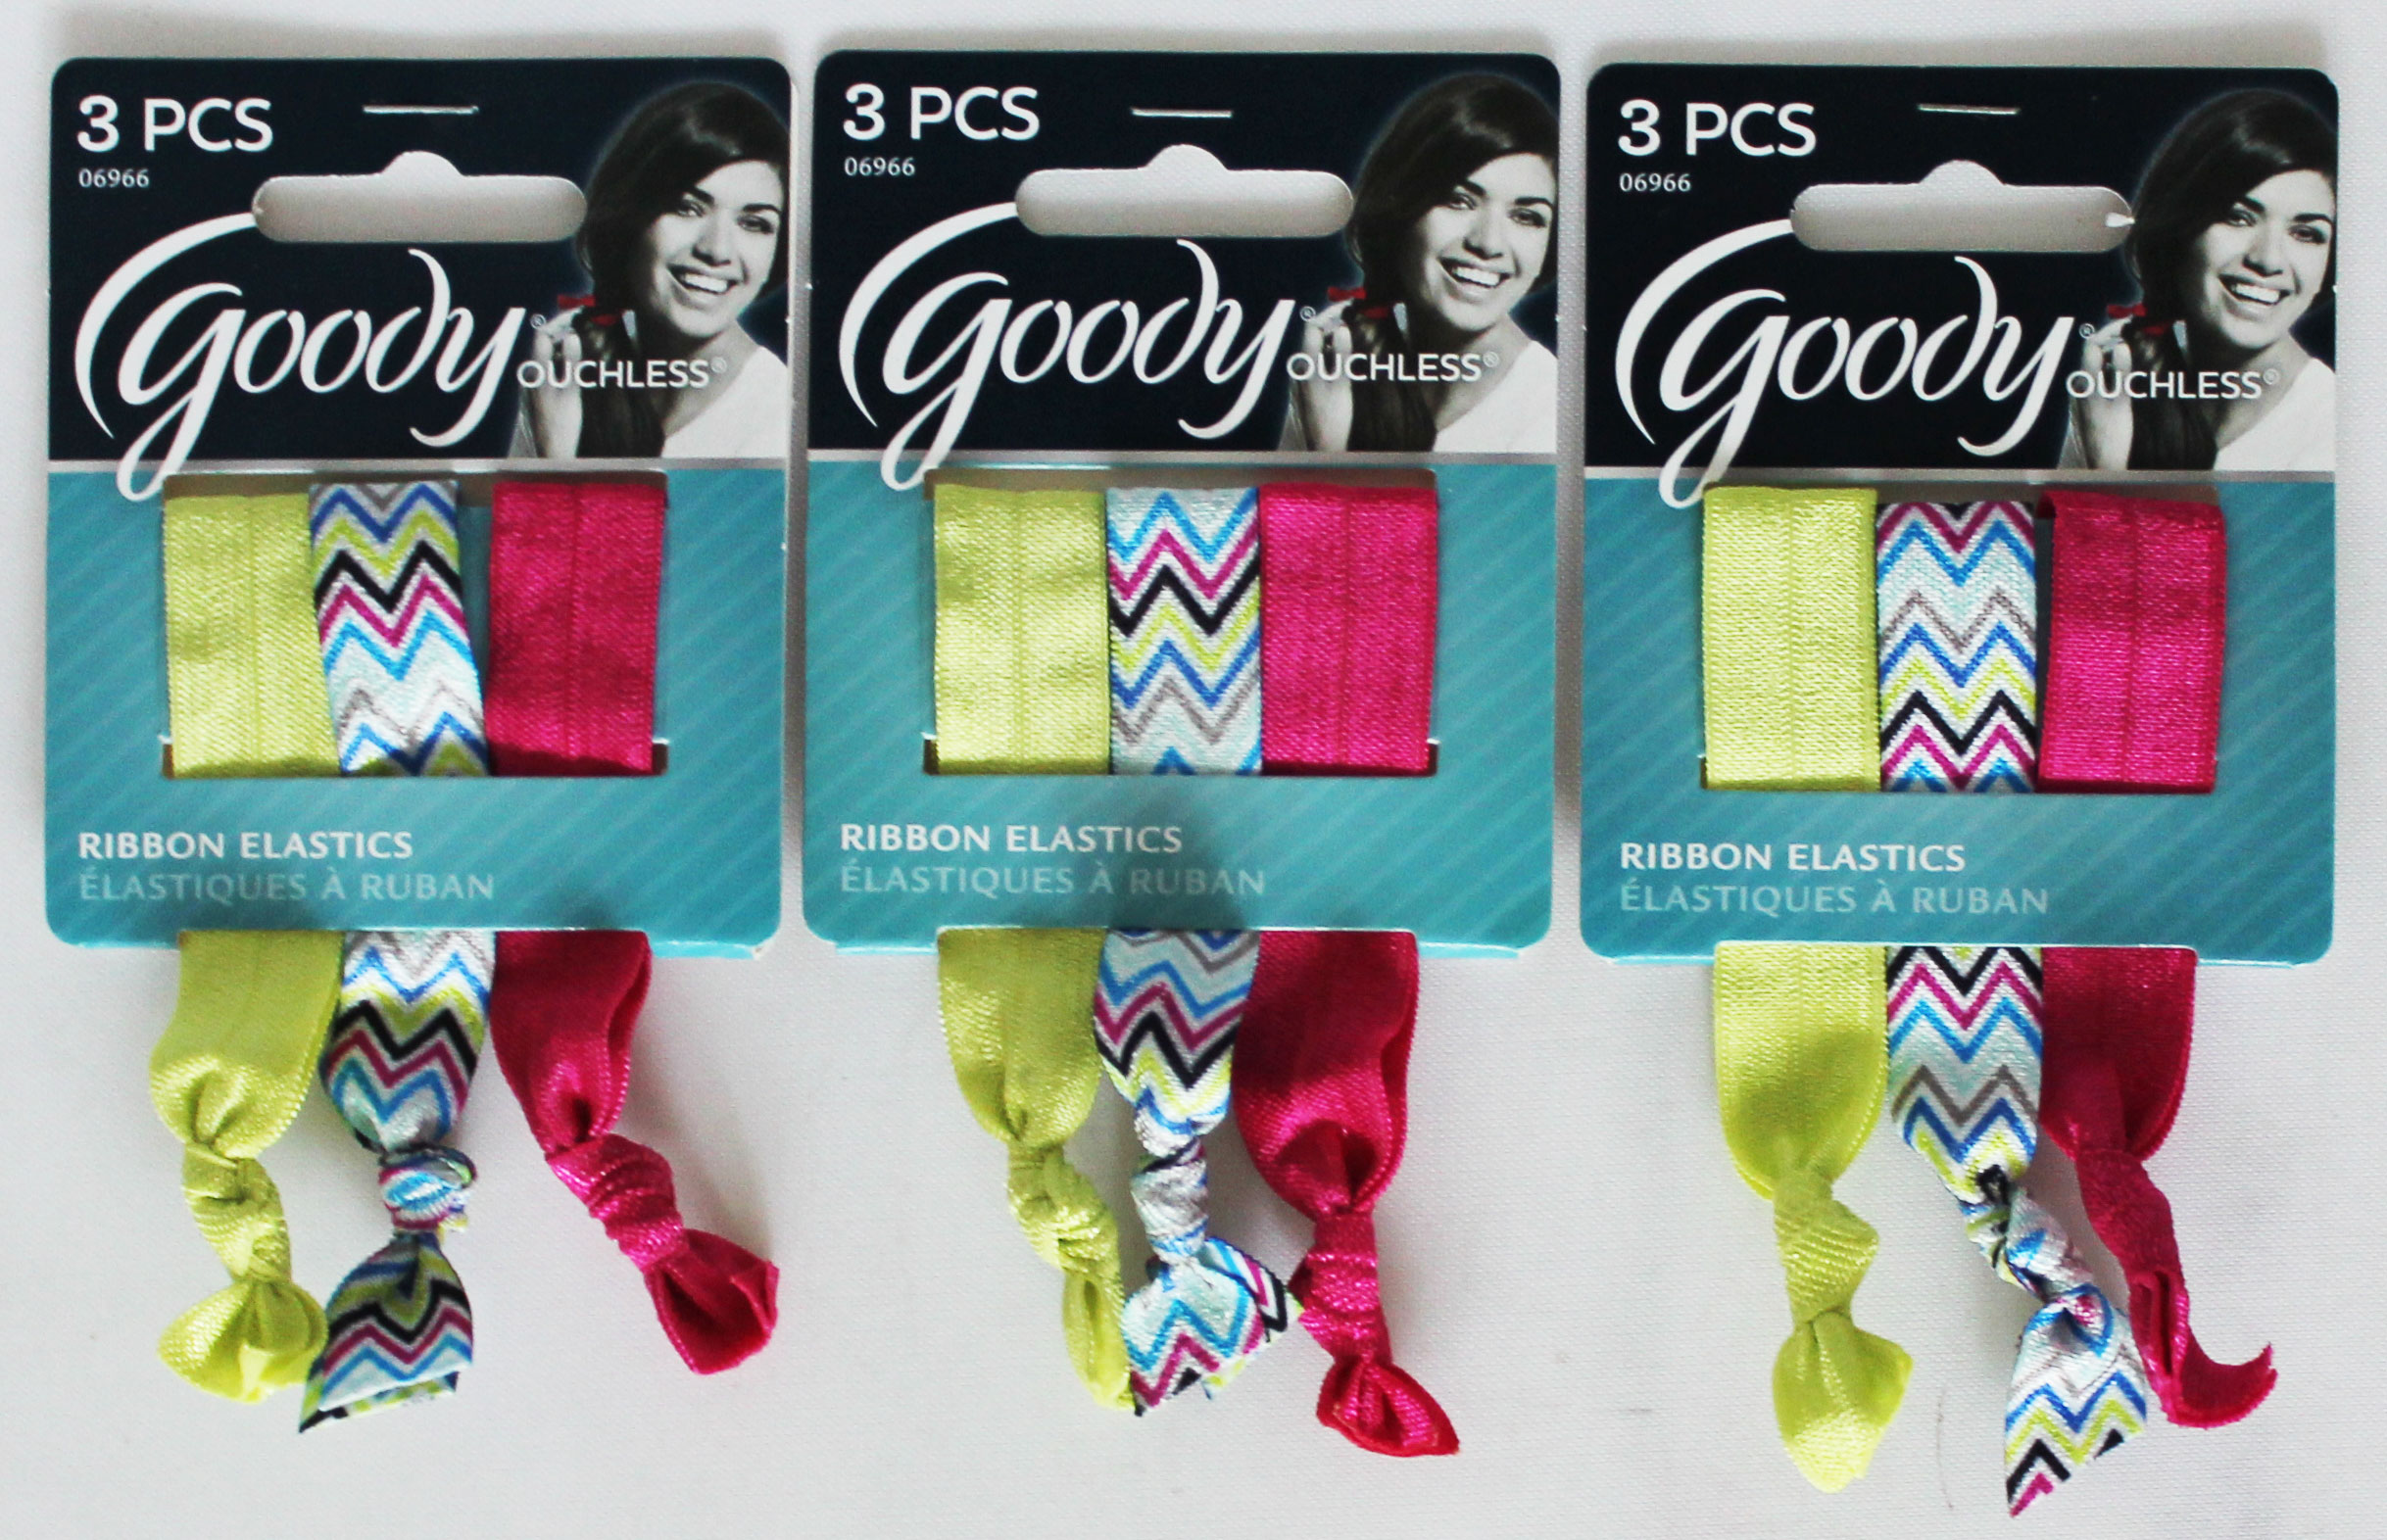 Goody Ouchless Ribbon Elastics (Pack of 3) 1ct - Click Image to Close